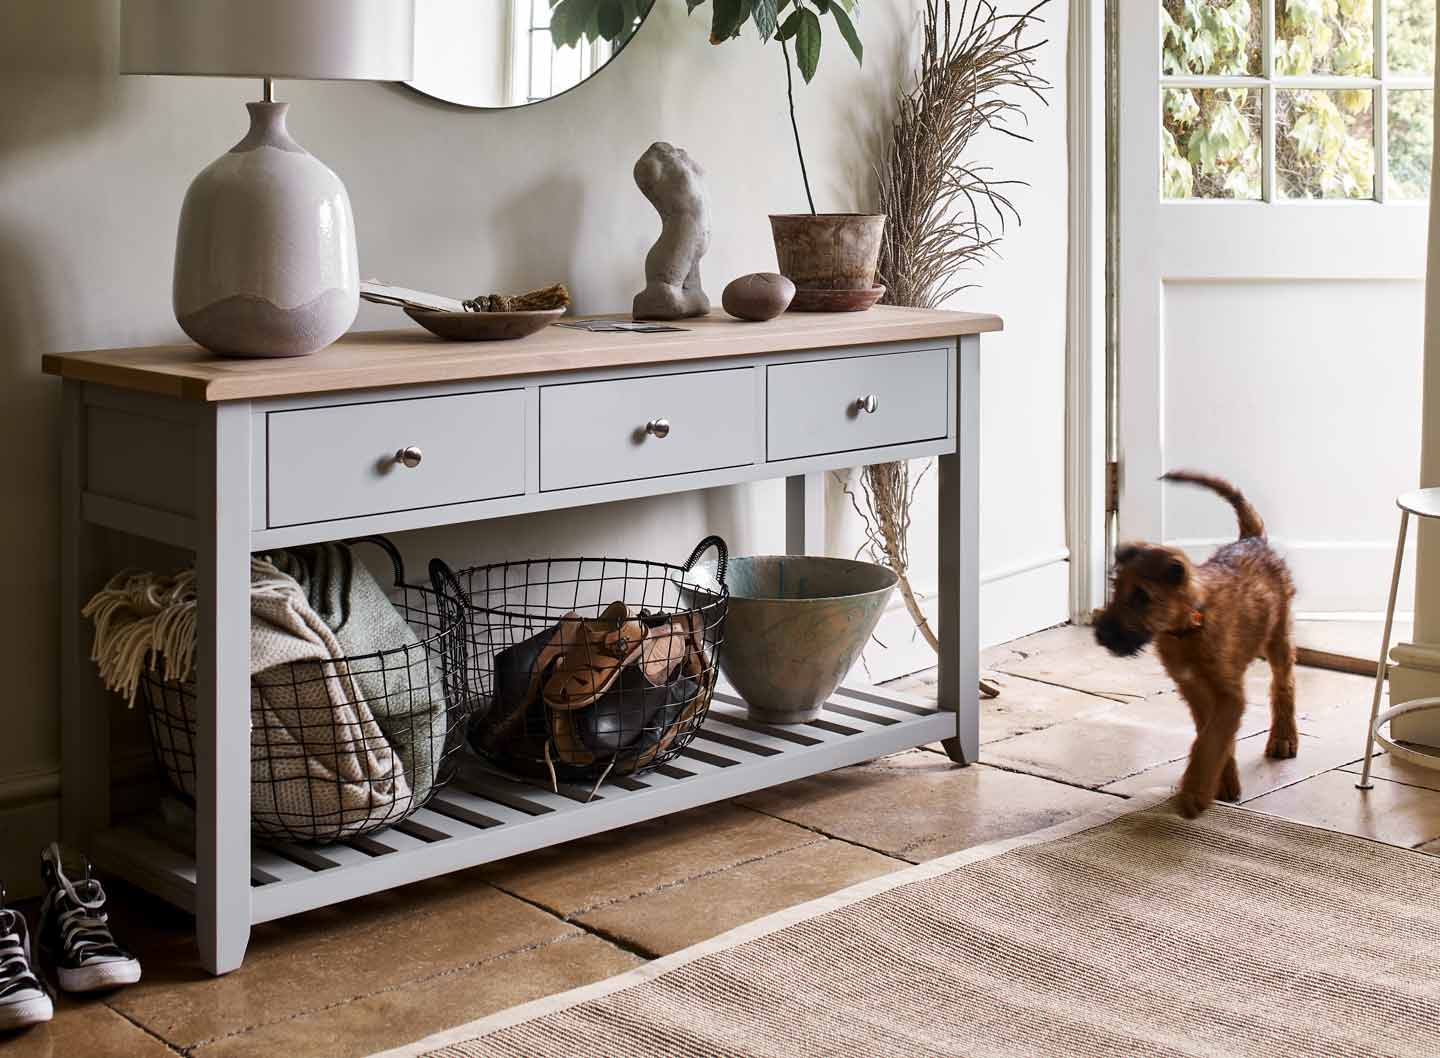 Home storage ideas blog post, home inspiration, hallway storage, The Cotswold Company Blog